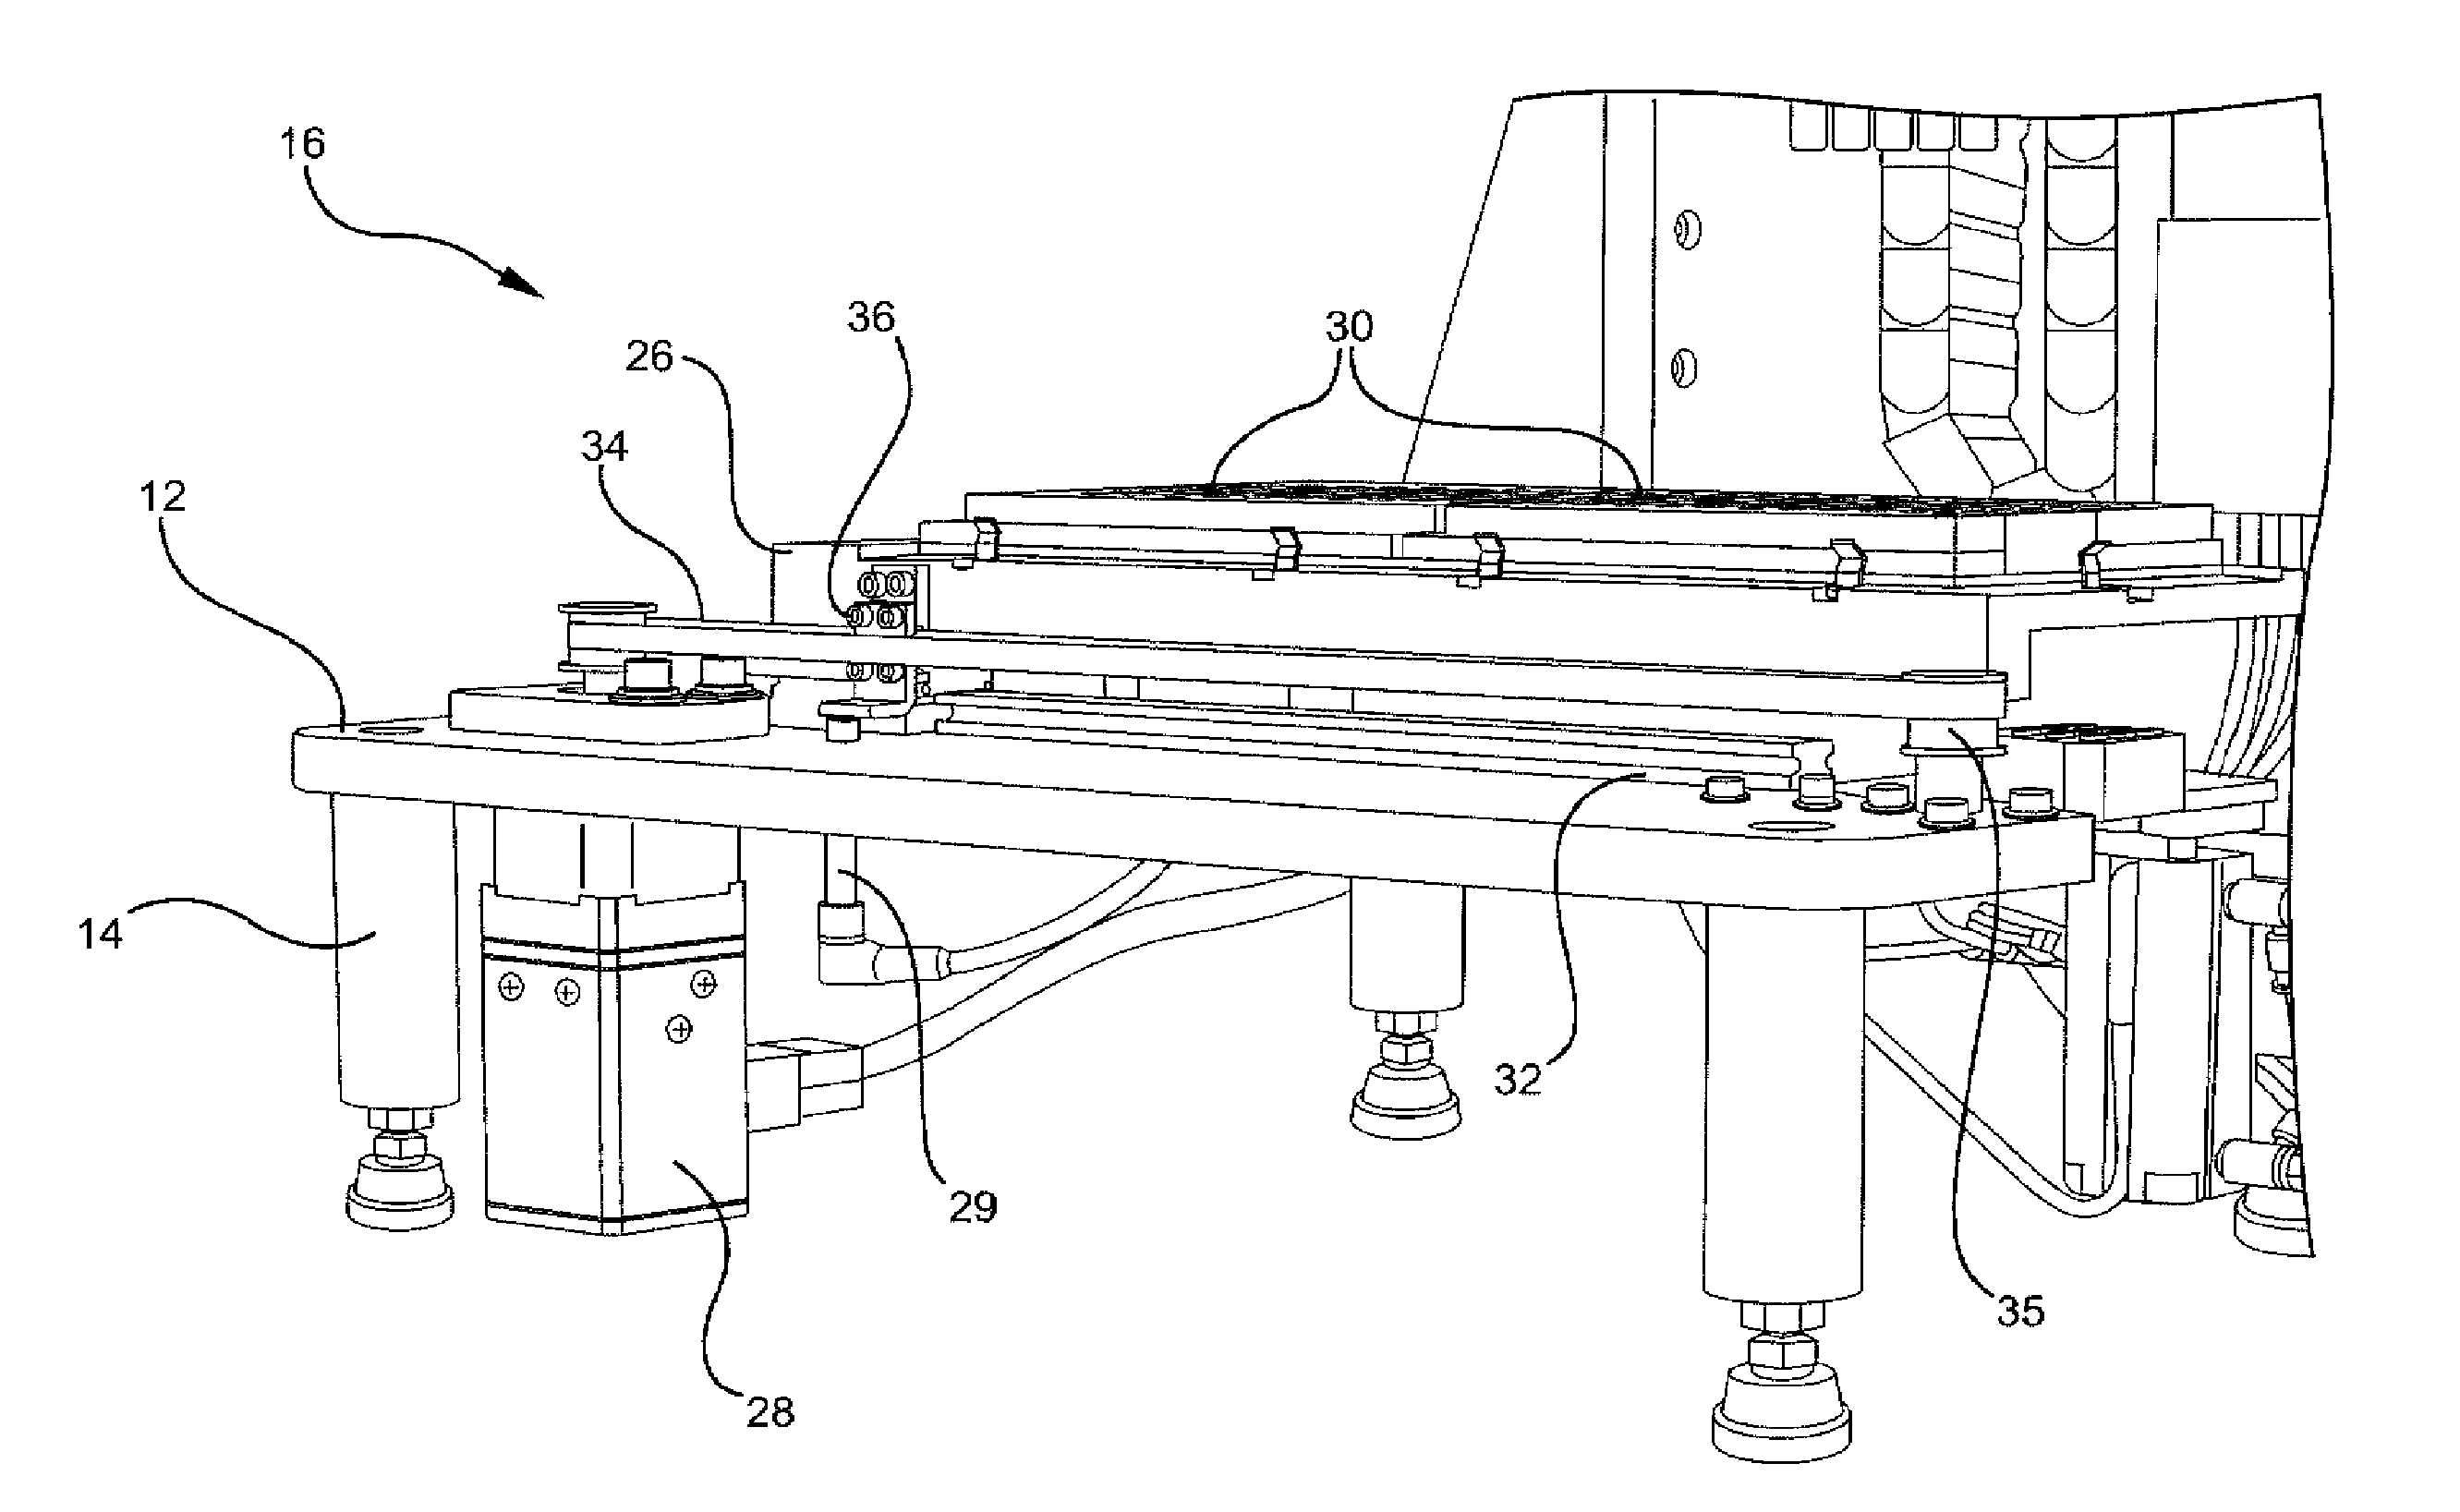 Apparatus for transferring samples from source vessels to target vessels